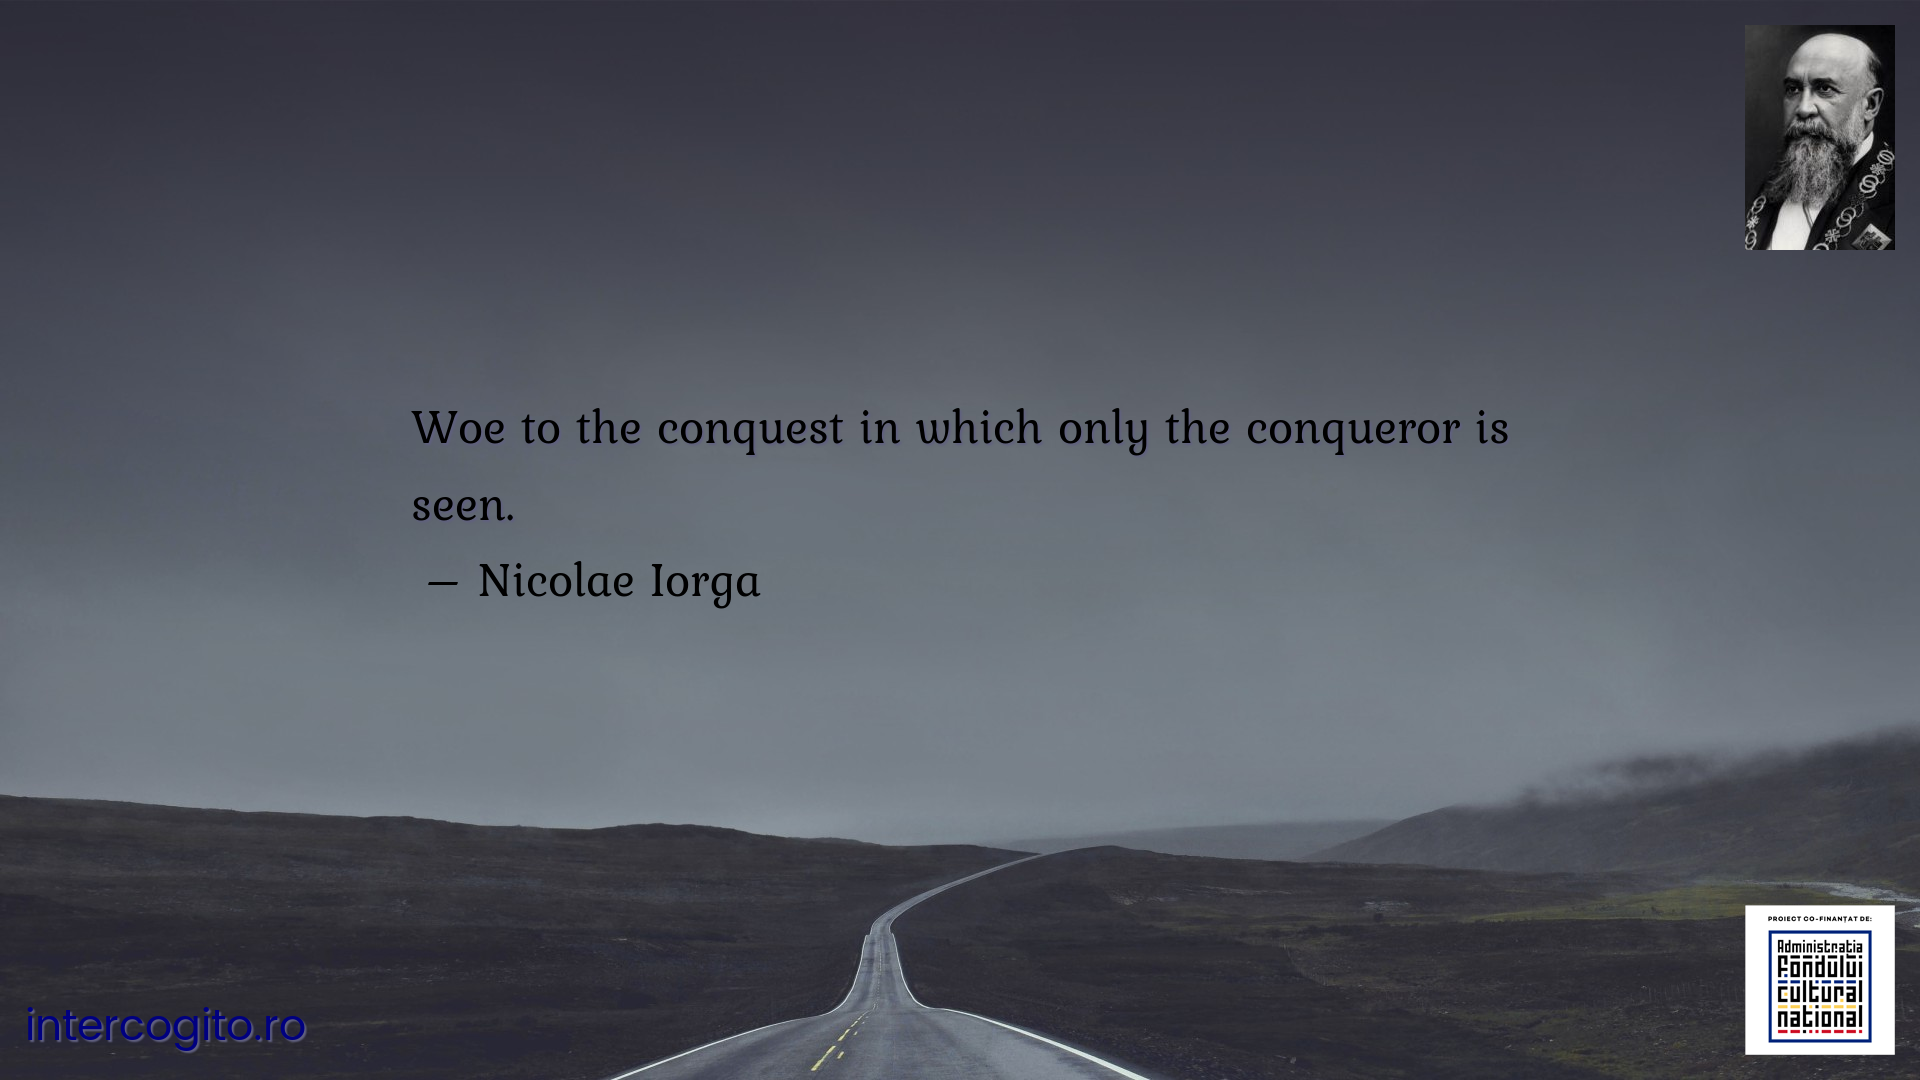 Woe to the conquest in which only the conqueror is seen.